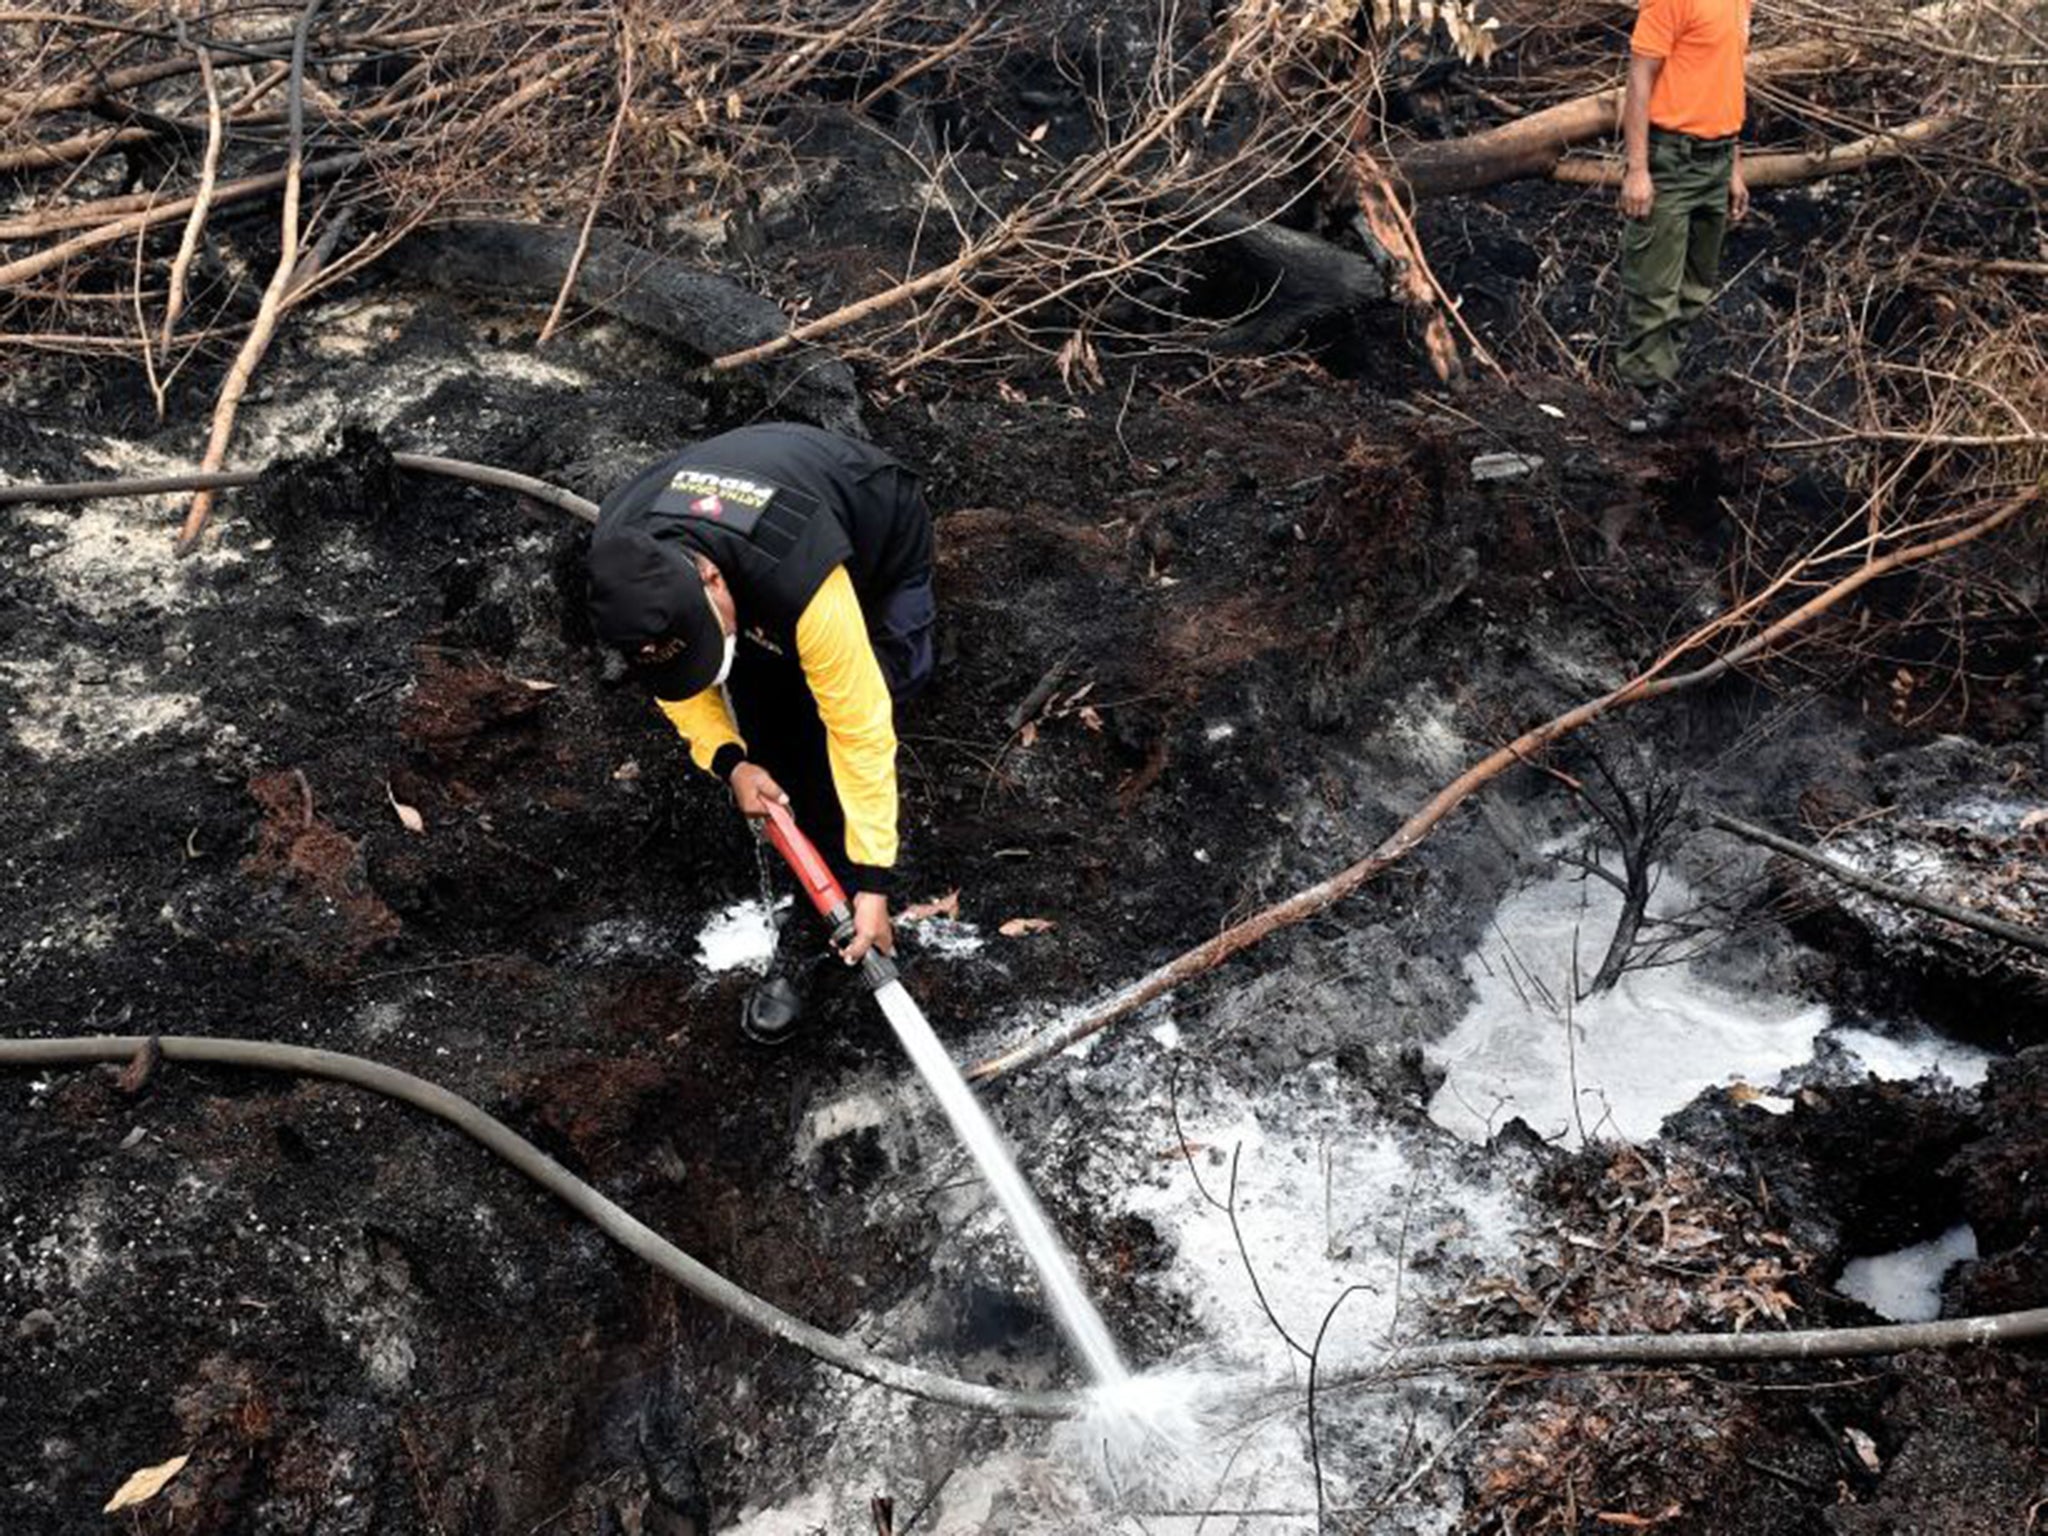 Forest life and death: fire fighters and local civilians struggle to put out fires in forest and peatlands in Central Kalimantan, Indonesia, last month